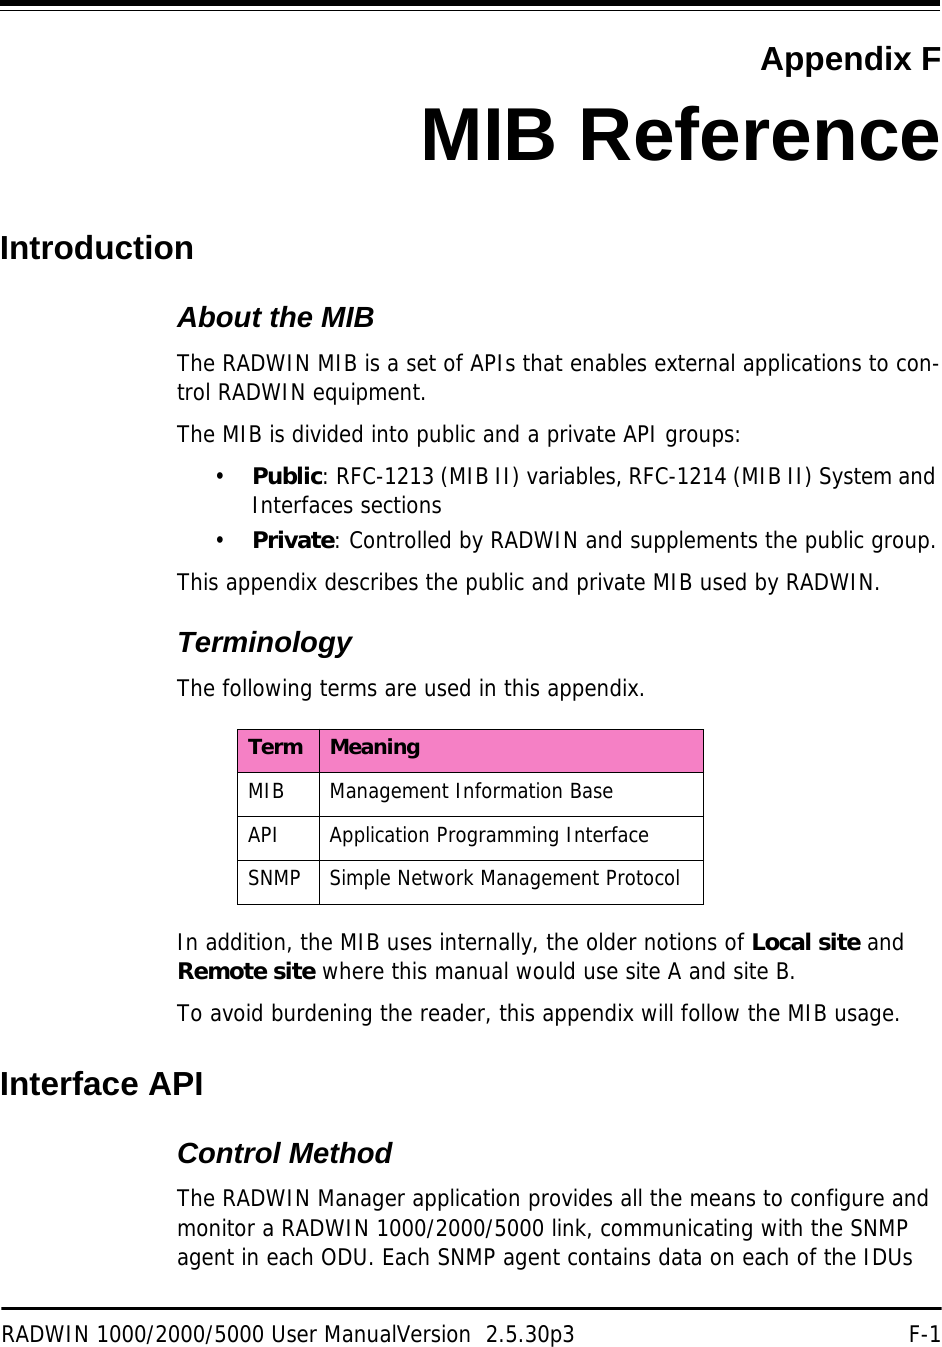 RADWIN 1000/2000/5000 User ManualVersion  2.5.30p3 F-1Appendix FMIB ReferenceIntroductionAbout the MIBThe RADWIN MIB is a set of APIs that enables external applications to con-trol RADWIN equipment.The MIB is divided into public and a private API groups:•Public: RFC-1213 (MIB II) variables, RFC-1214 (MIB II) System and Interfaces sections•Private: Controlled by RADWIN and supplements the public group.This appendix describes the public and private MIB used by RADWIN.TerminologyThe following terms are used in this appendix.In addition, the MIB uses internally, the older notions of Local site and Remote site where this manual would use site A and site B.To avoid burdening the reader, this appendix will follow the MIB usage.Interface APIControl MethodThe RADWIN Manager application provides all the means to configure and monitor a RADWIN 1000/2000/5000 link, communicating with the SNMP agent in each ODU. Each SNMP agent contains data on each of the IDUs Term MeaningMIB Management Information BaseAPI Application Programming InterfaceSNMP Simple Network Management Protocol